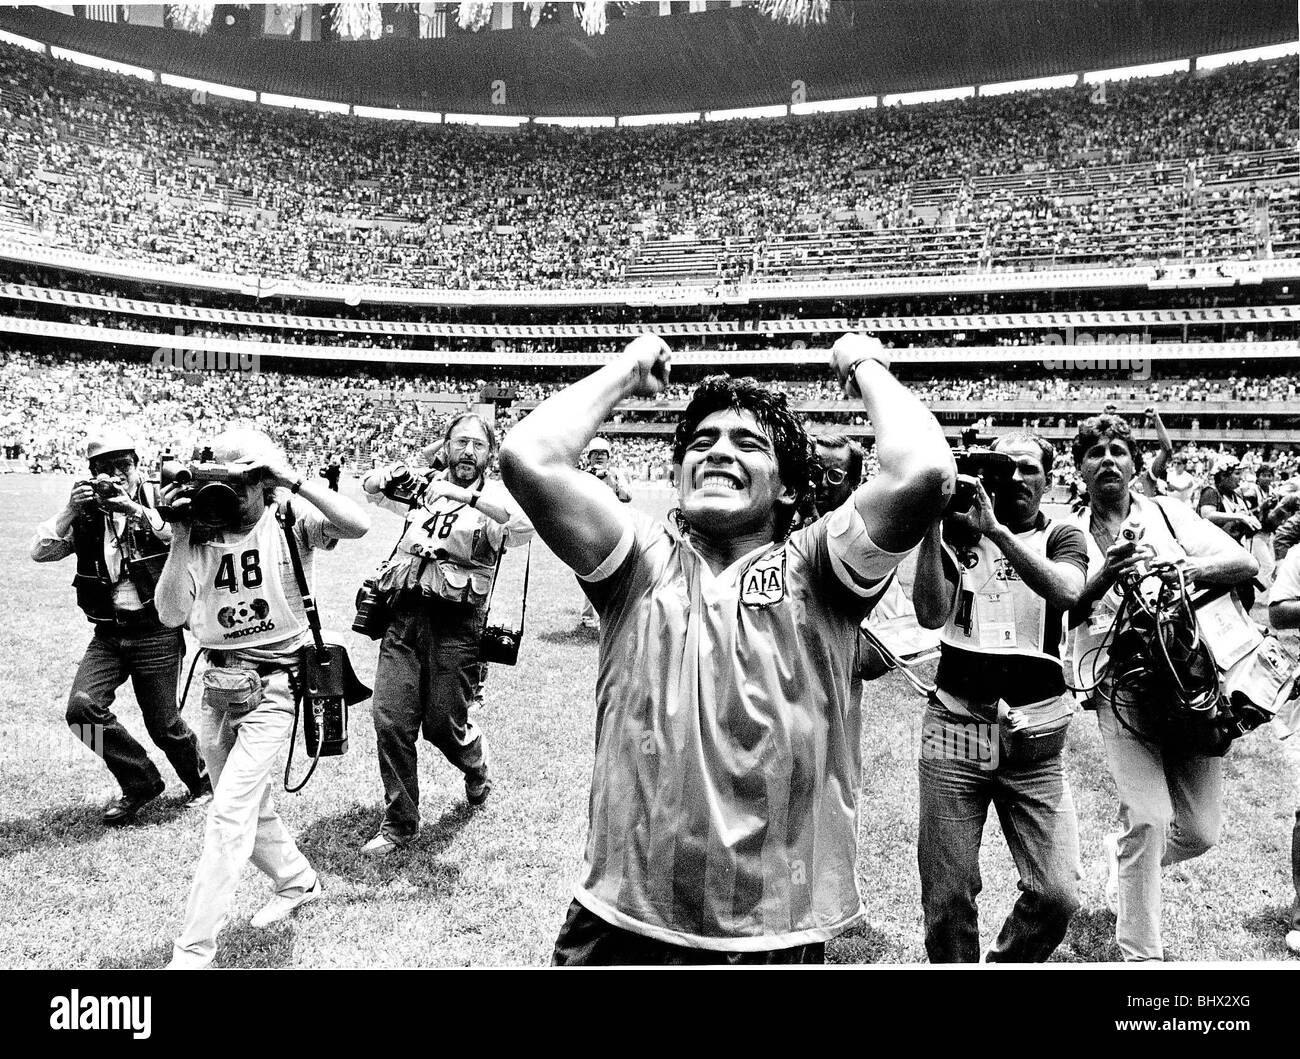 1986 World Cup High Resolution Stock Photography and Images - Alamy